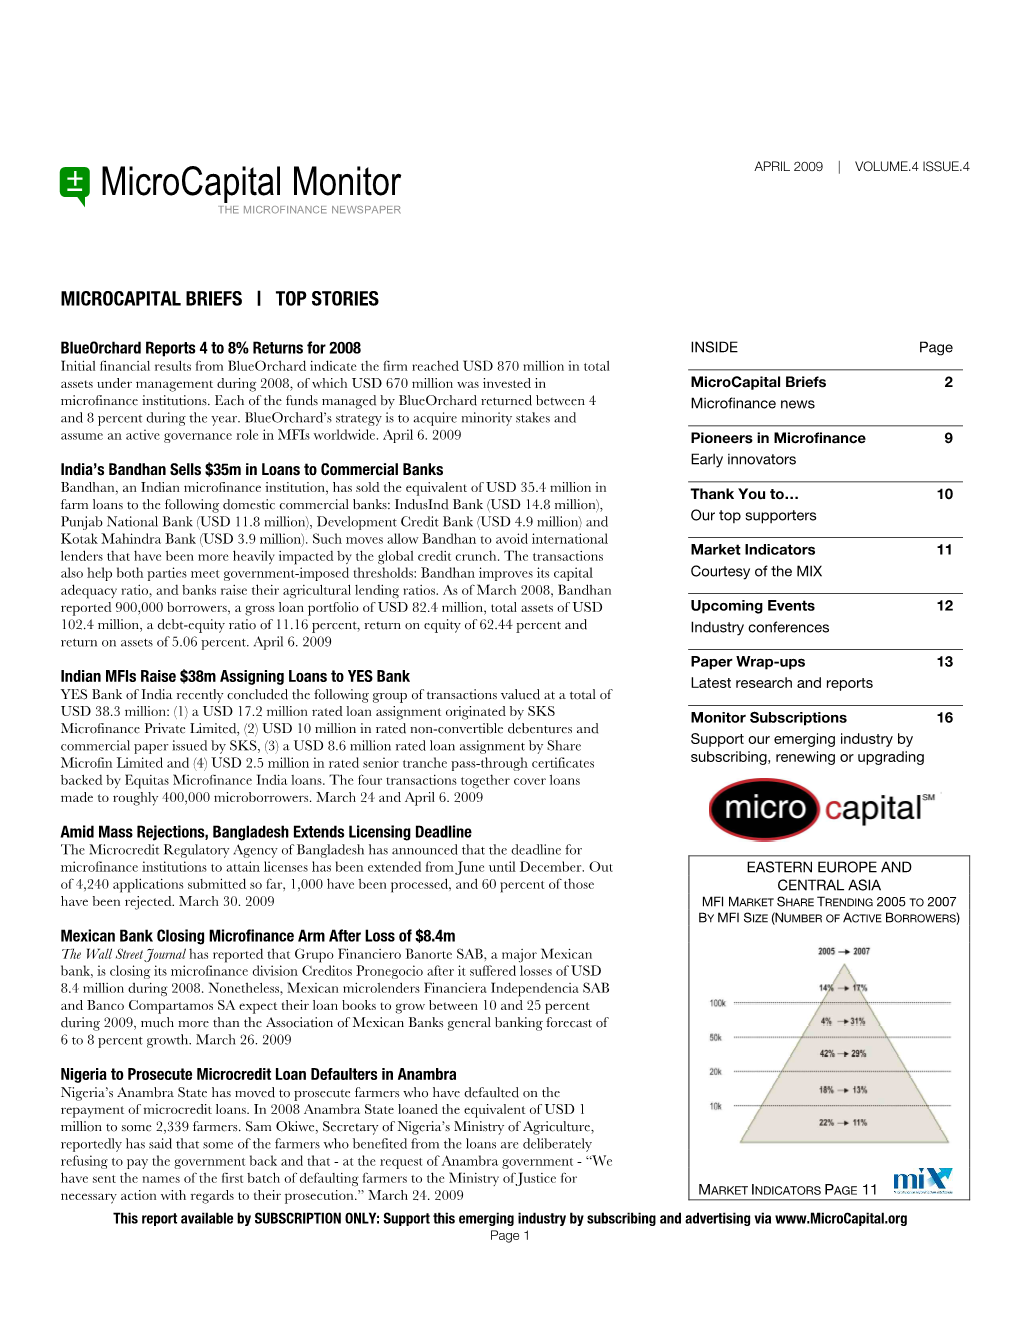 Microcapital Monitor APRIL 2009 | VOLUME.4 ISSUE.4 the MICROFINANCE NEWSPAPER